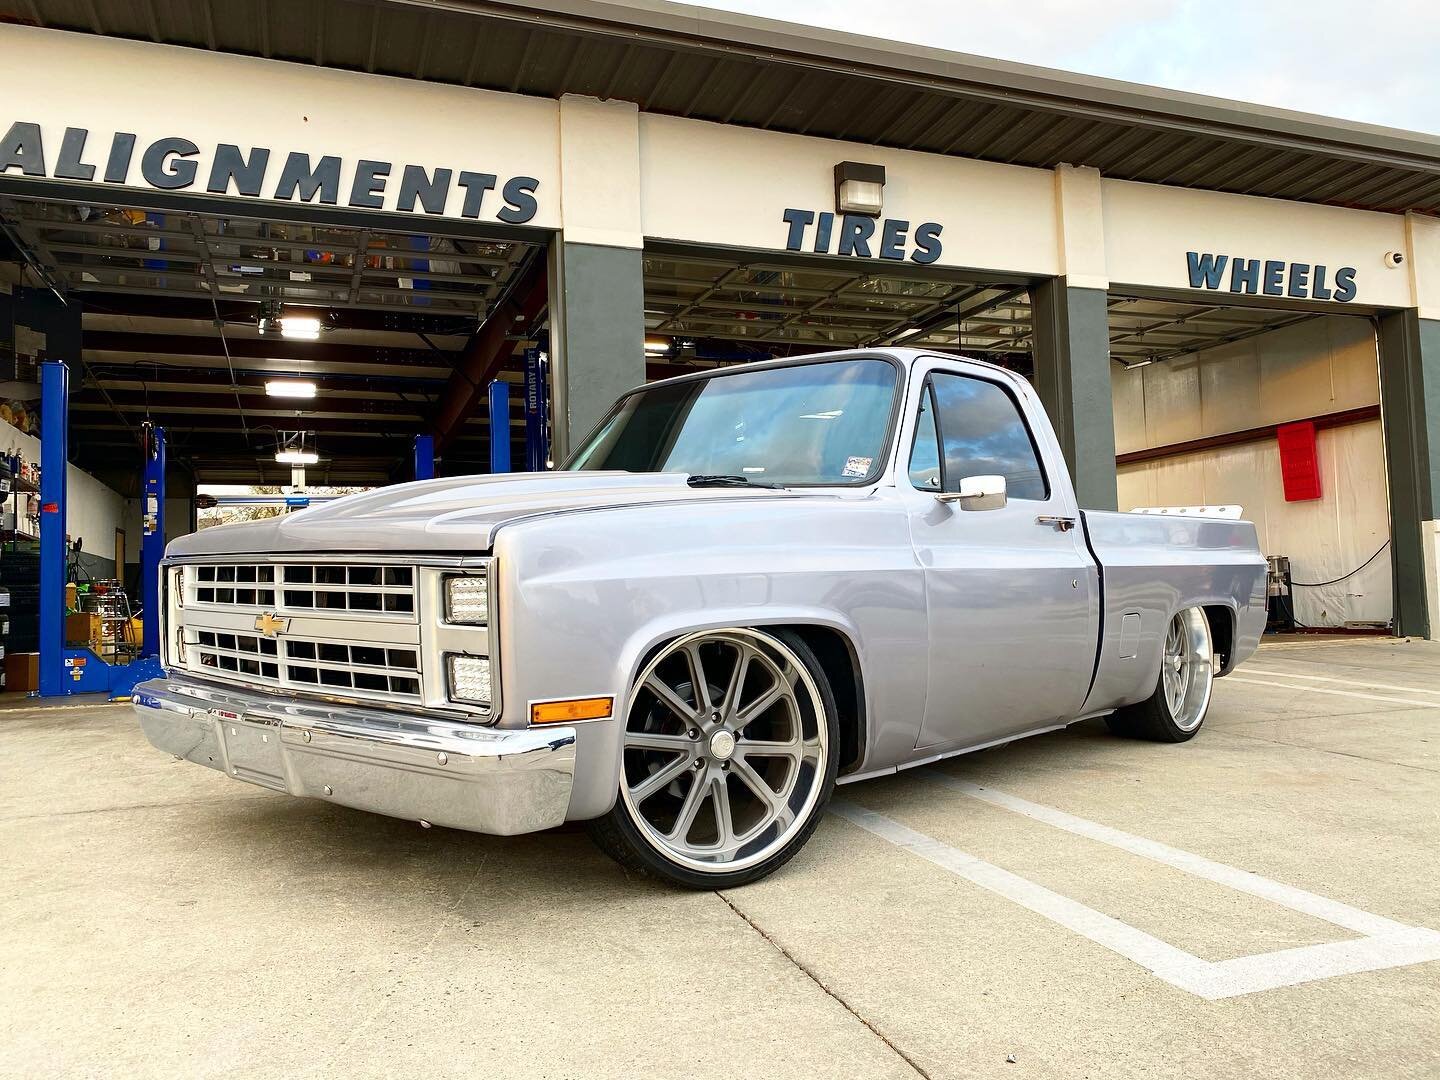 Check out those @usmags on this @chevrolet! We can get you this classic look for just $5 down this month! #okc #loweredlifestyle #loweredchevy #usmags #chevrolet